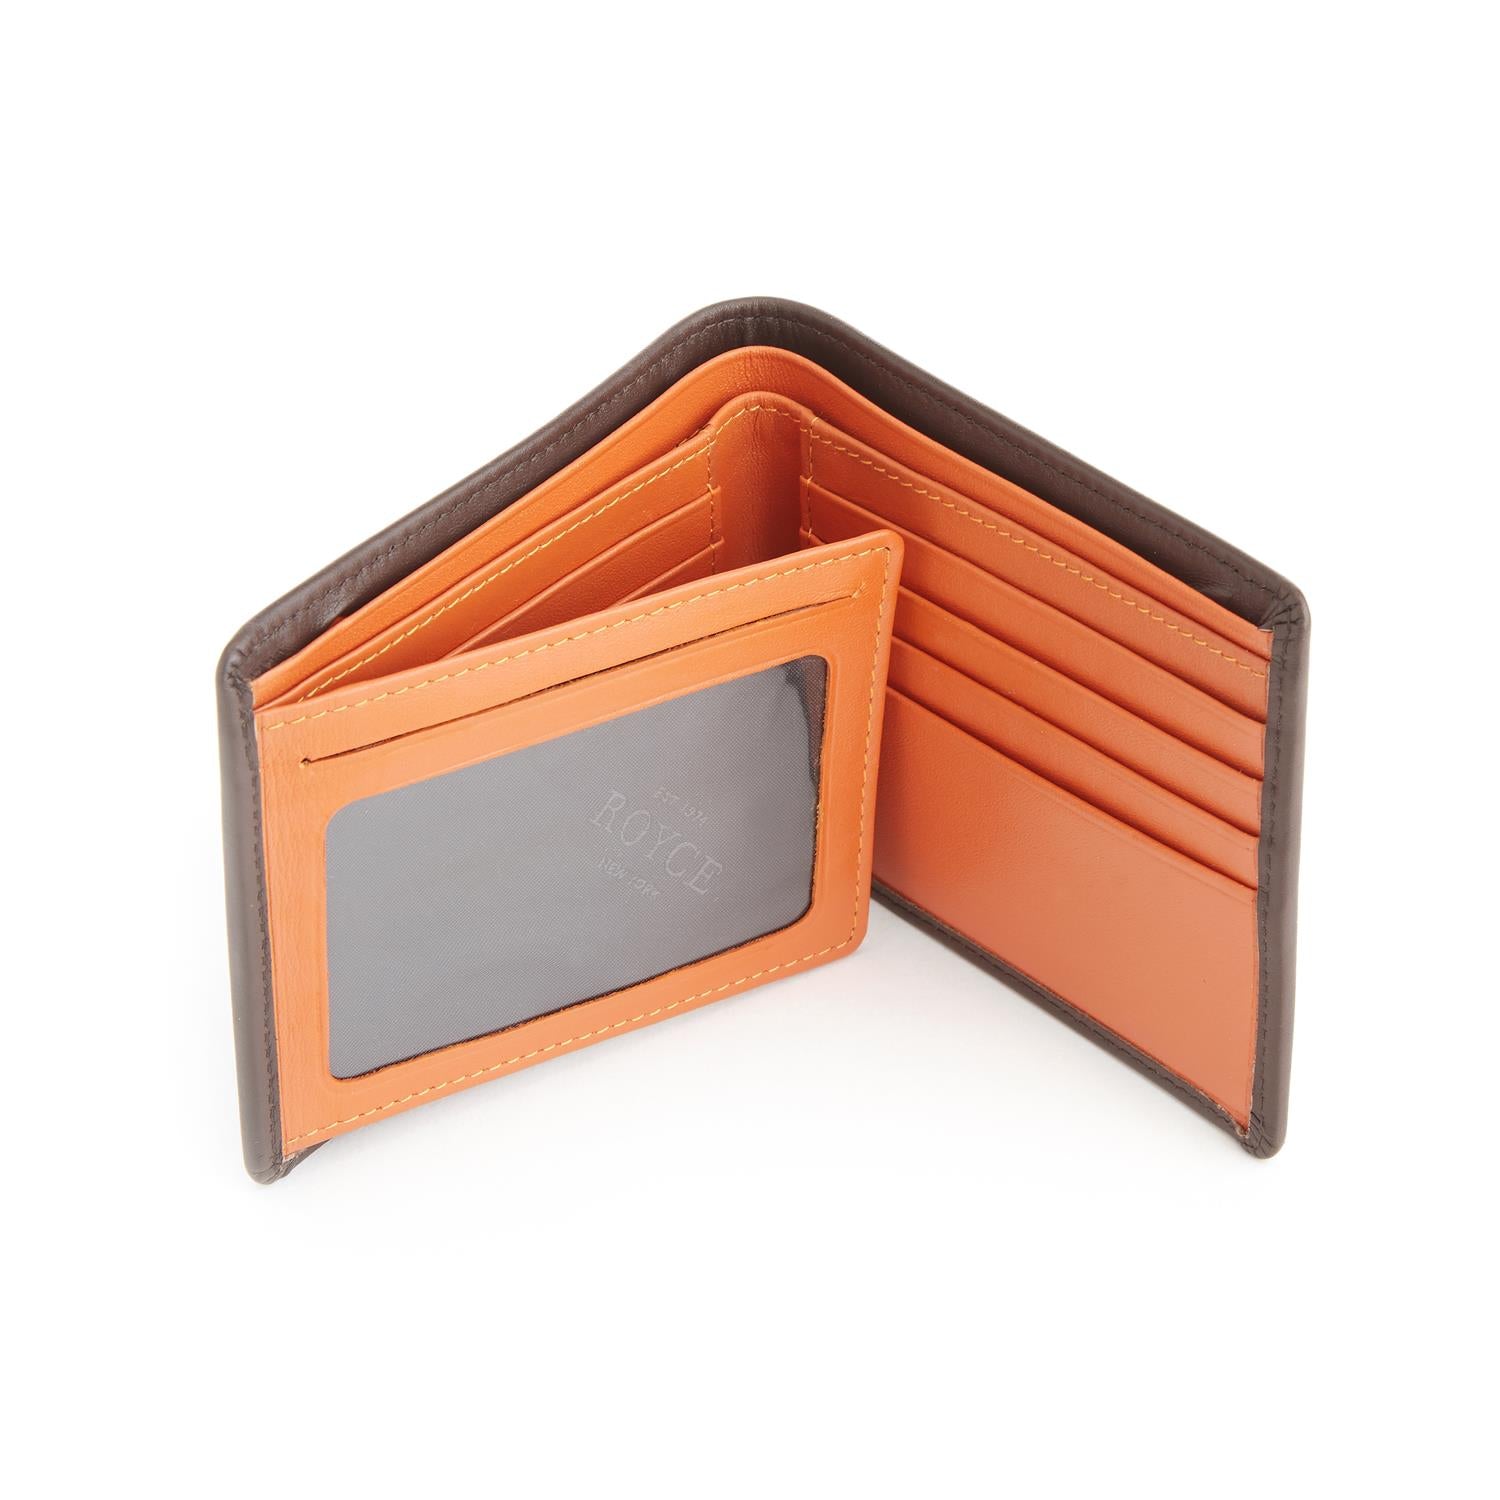 Royce New York Rfid Blocking Trifold Wallet In Coco With Orange Interior